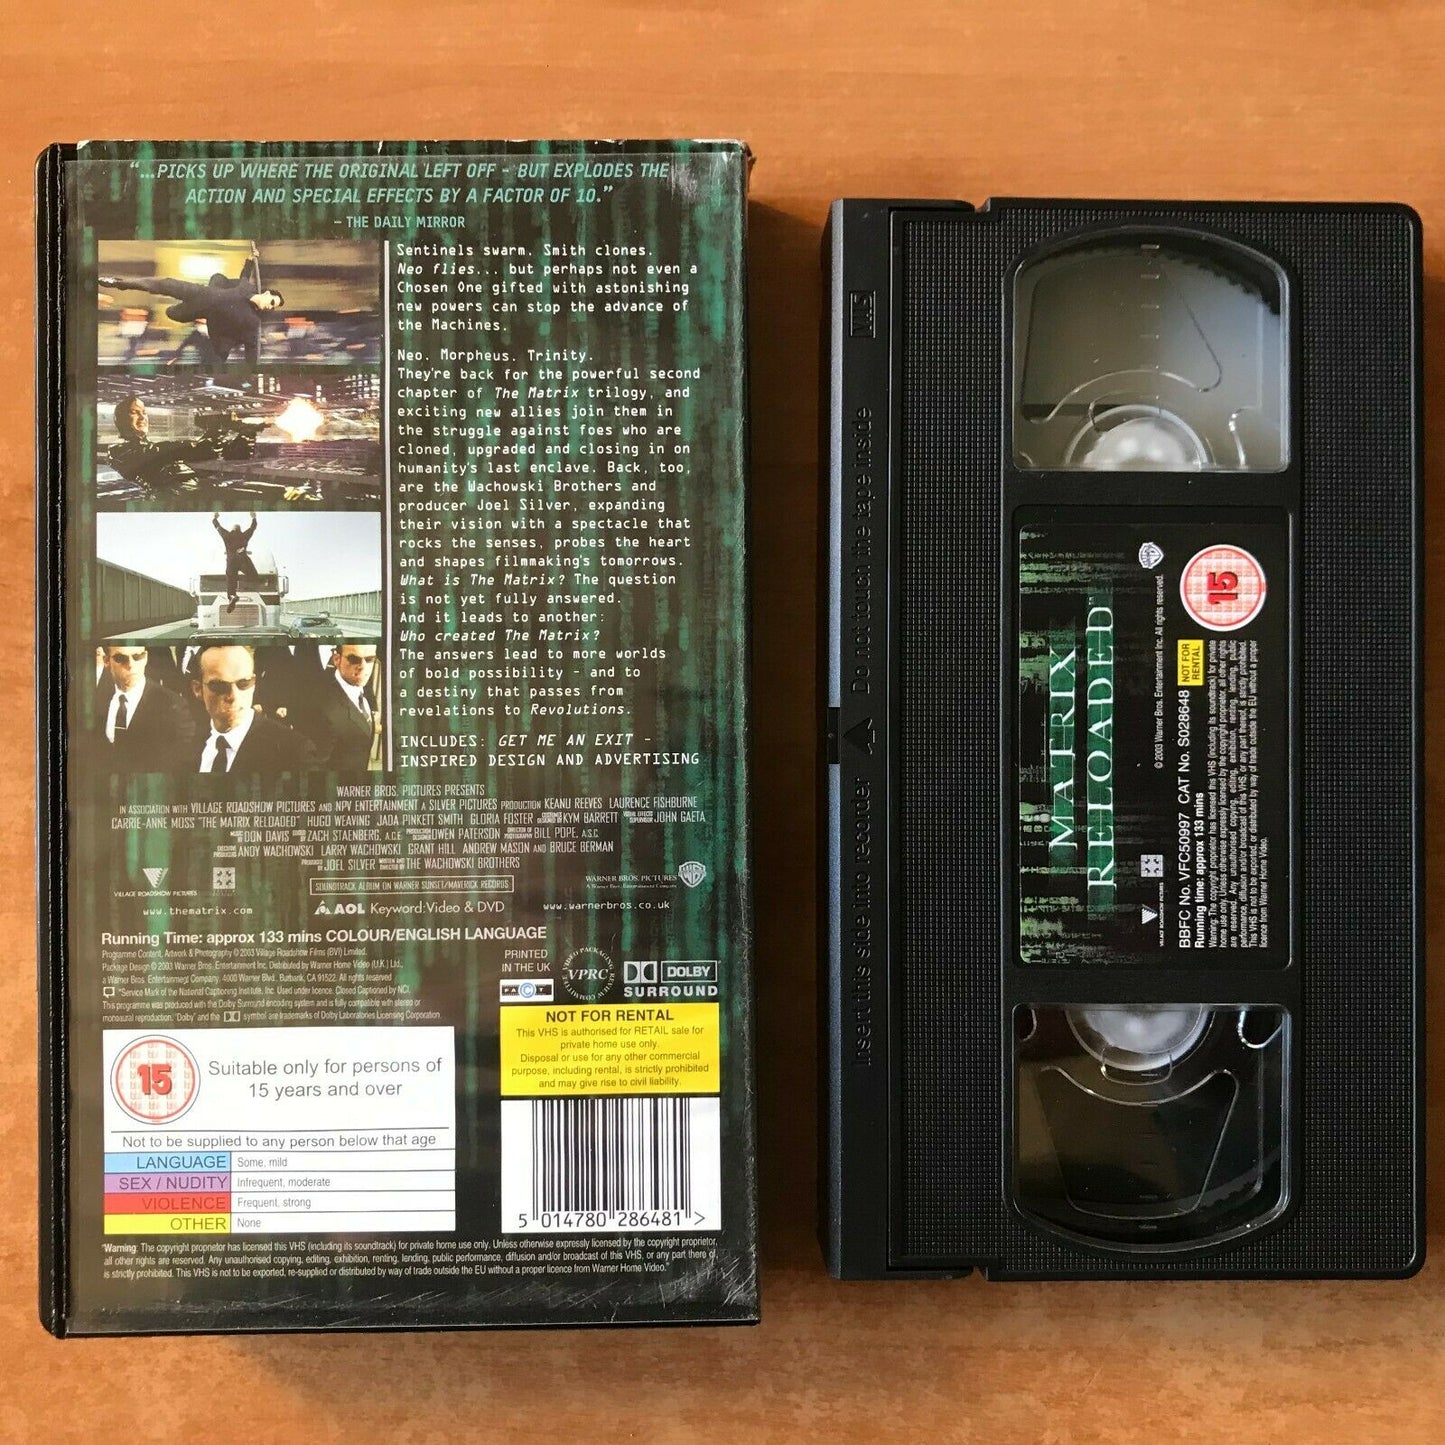 The Matrix Reloaded; [The Wachowski Brothers] Sci-Fi Action - Keanu Reeves - VHS-